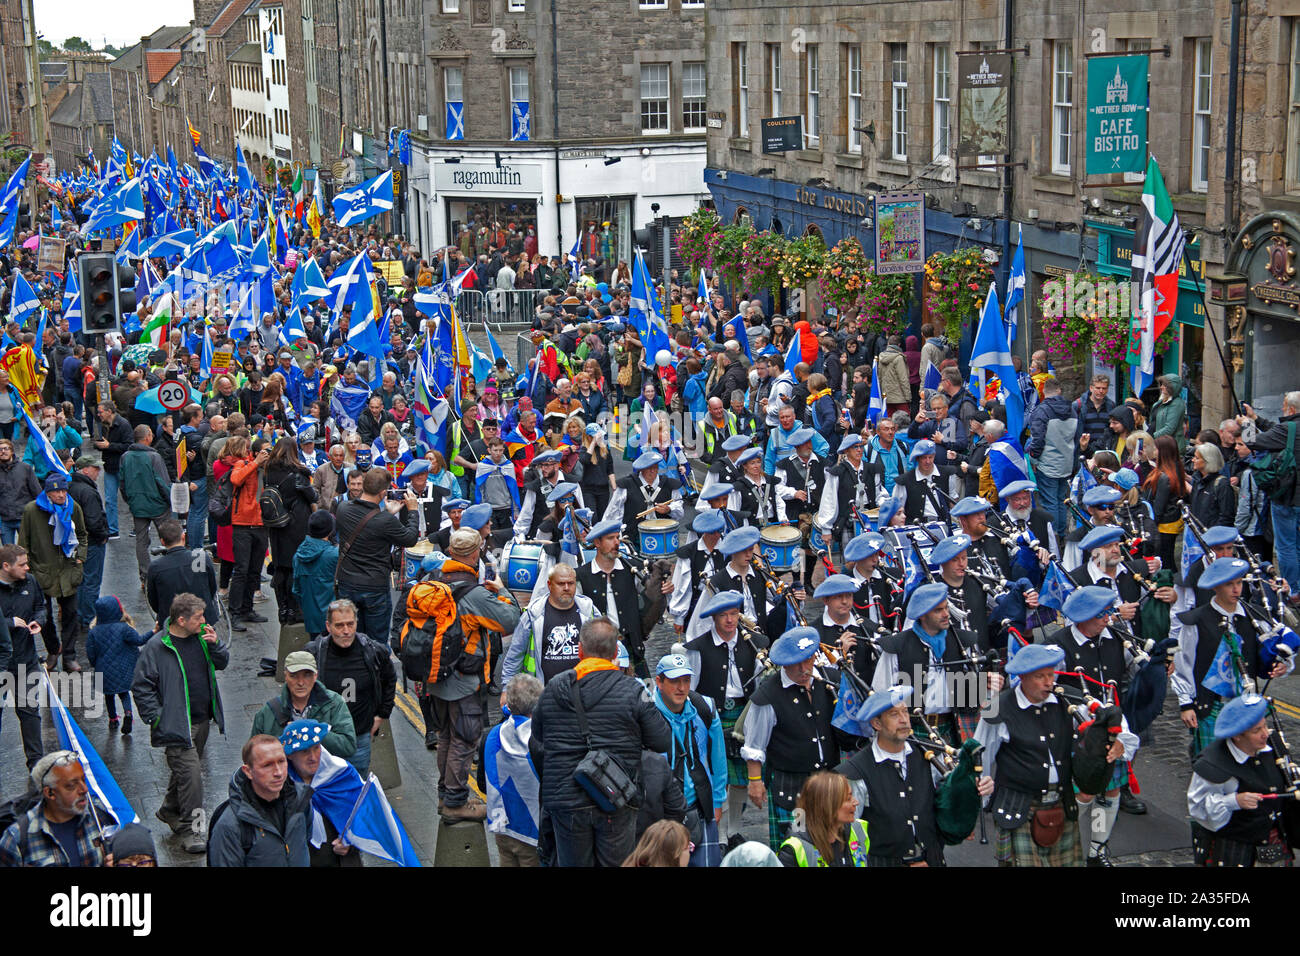 Edinburgh, Scotland, UK. 5th October 2019. Thousands of people of all ages marched on the streets of Edinburgh in a pro-Scottish independence march through the streets of Edinburgh. Organisations and groups who support separation from the United Kingdom joined the All Under One Banner (AUOB) procession on Saturday. AUOB estimate that at least 100,000 people might join the rally. Stock Photo